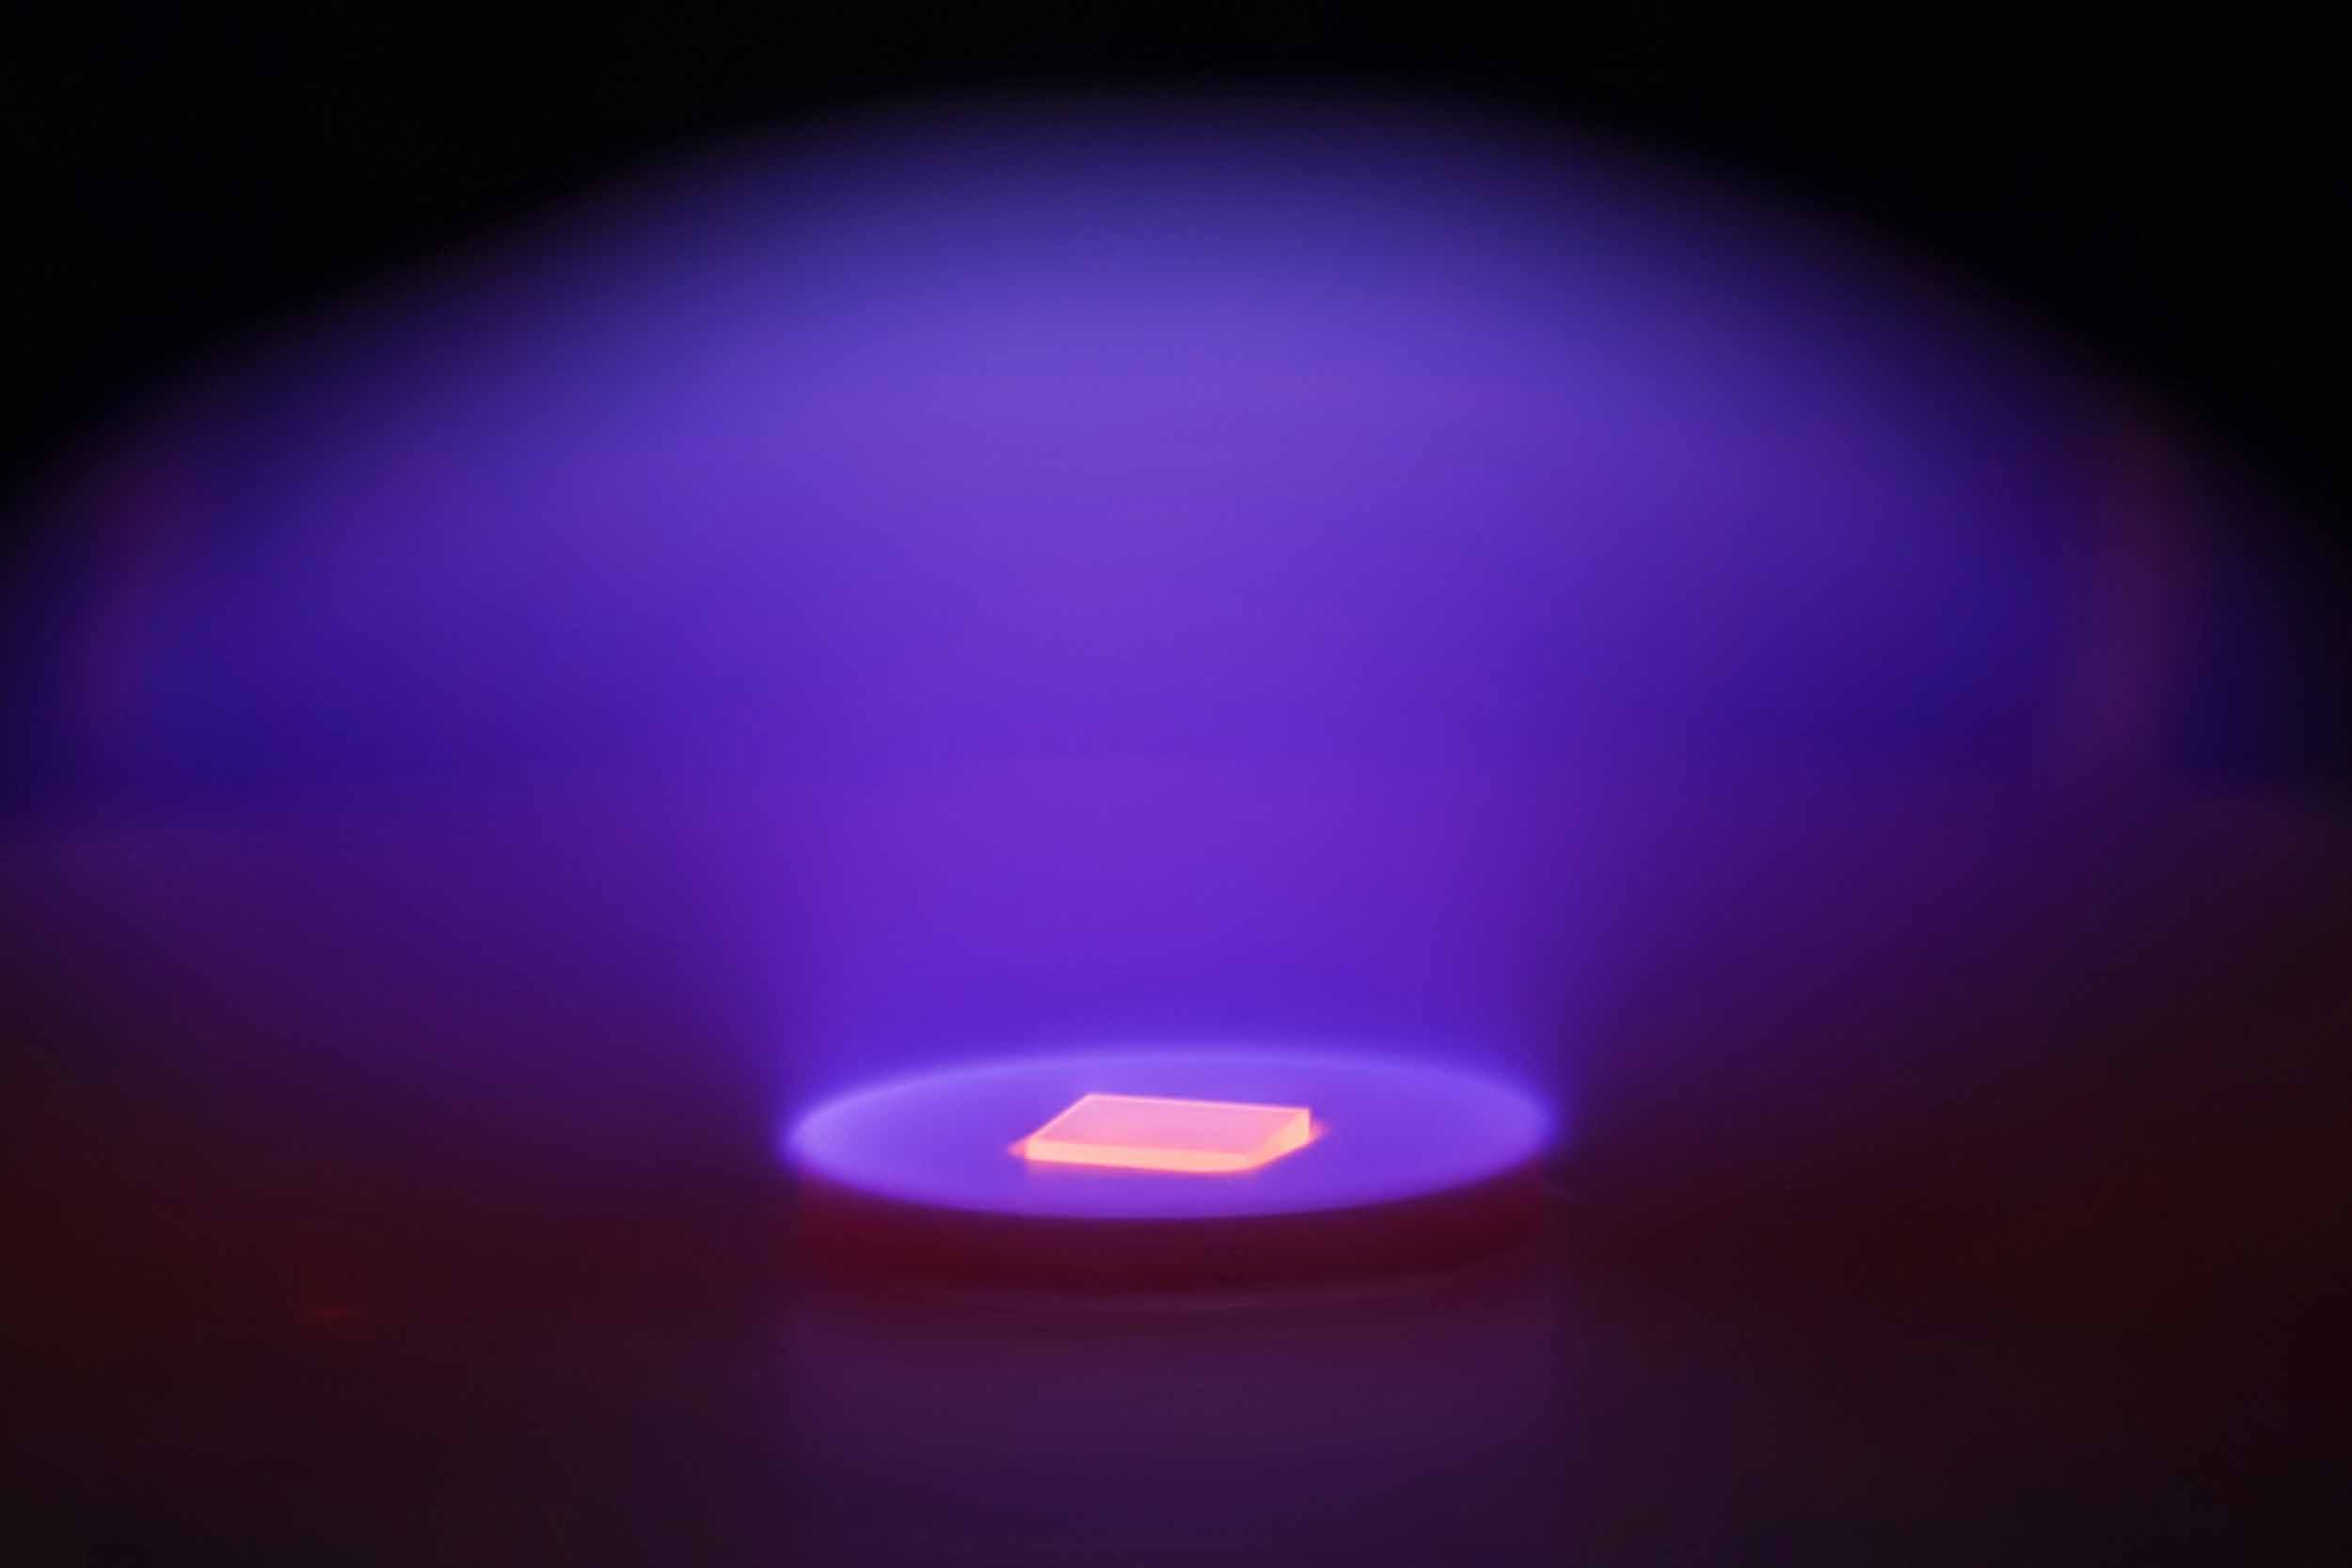 A microscopic photo of an artificial diamond growing in a lab environment. It looks like an golden, glowing, flat but layered square illuminated by a purple glowing disk.